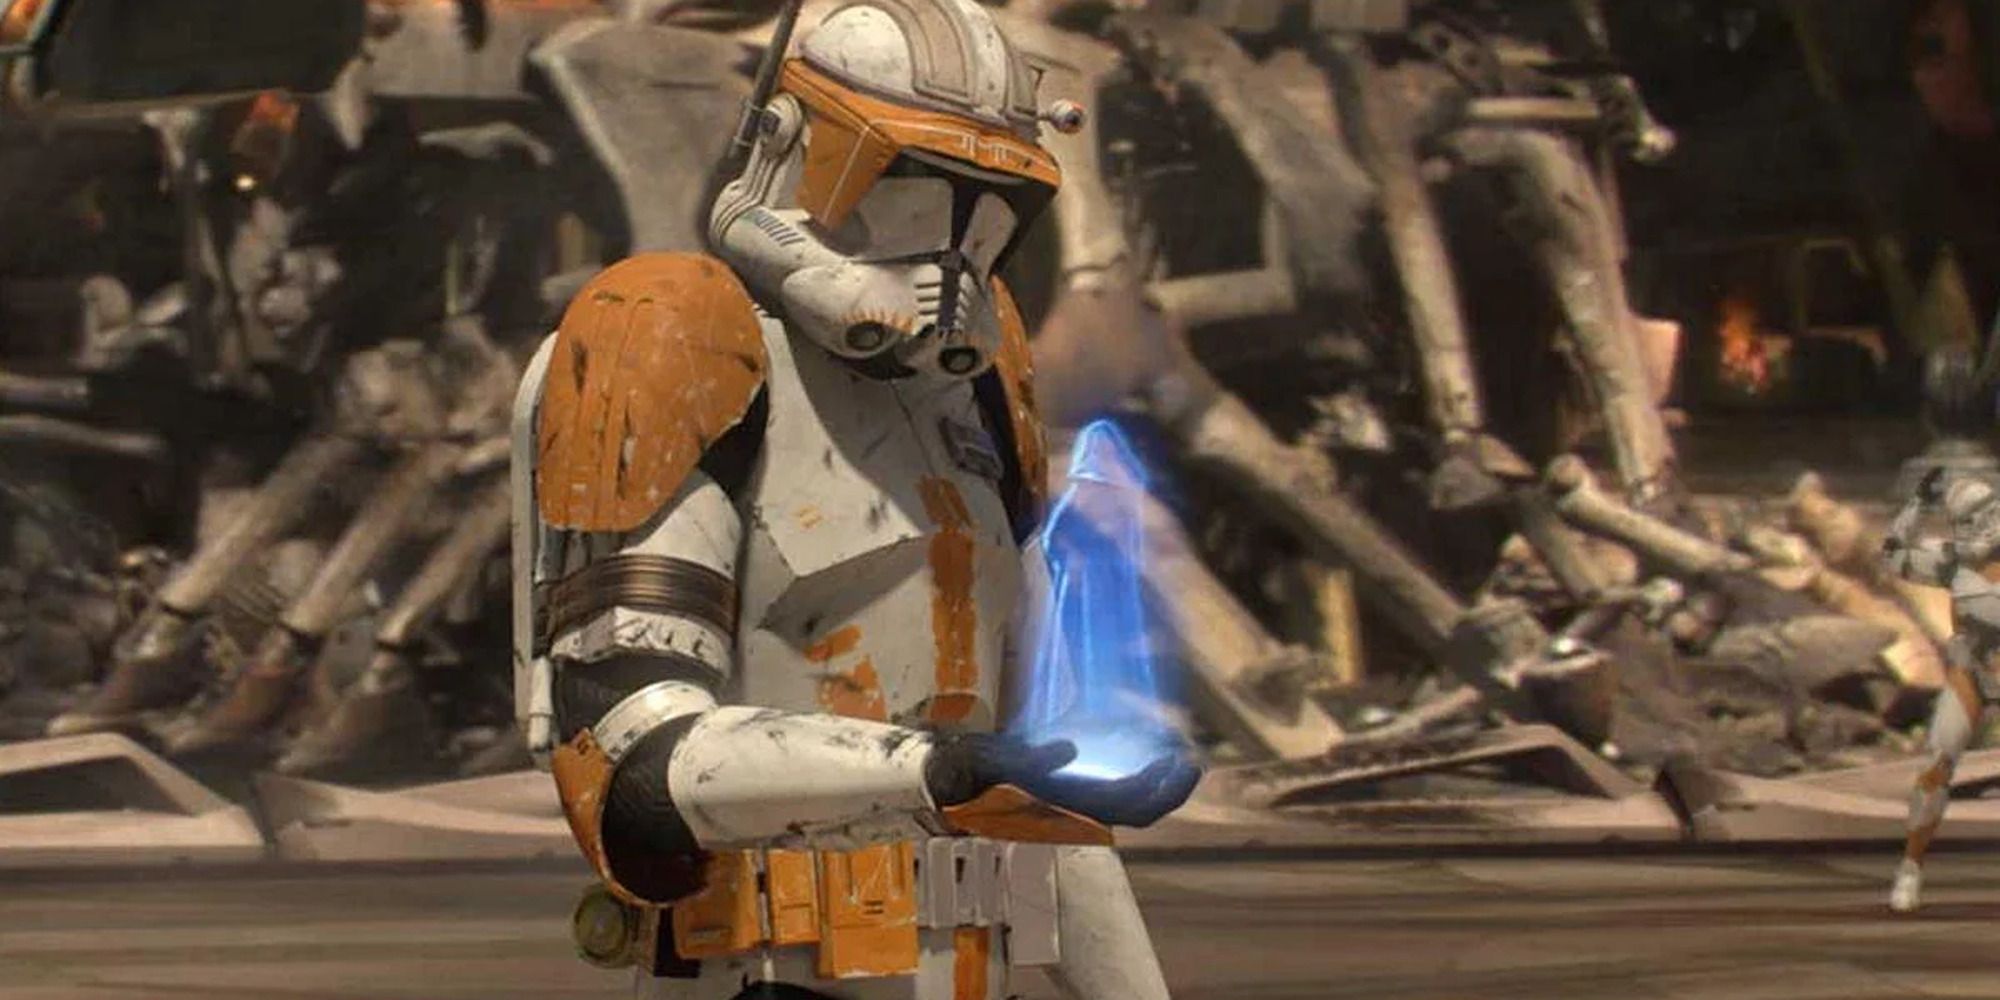 a clone trooper in yellow armor staring at the sinister hologram on the battlefield